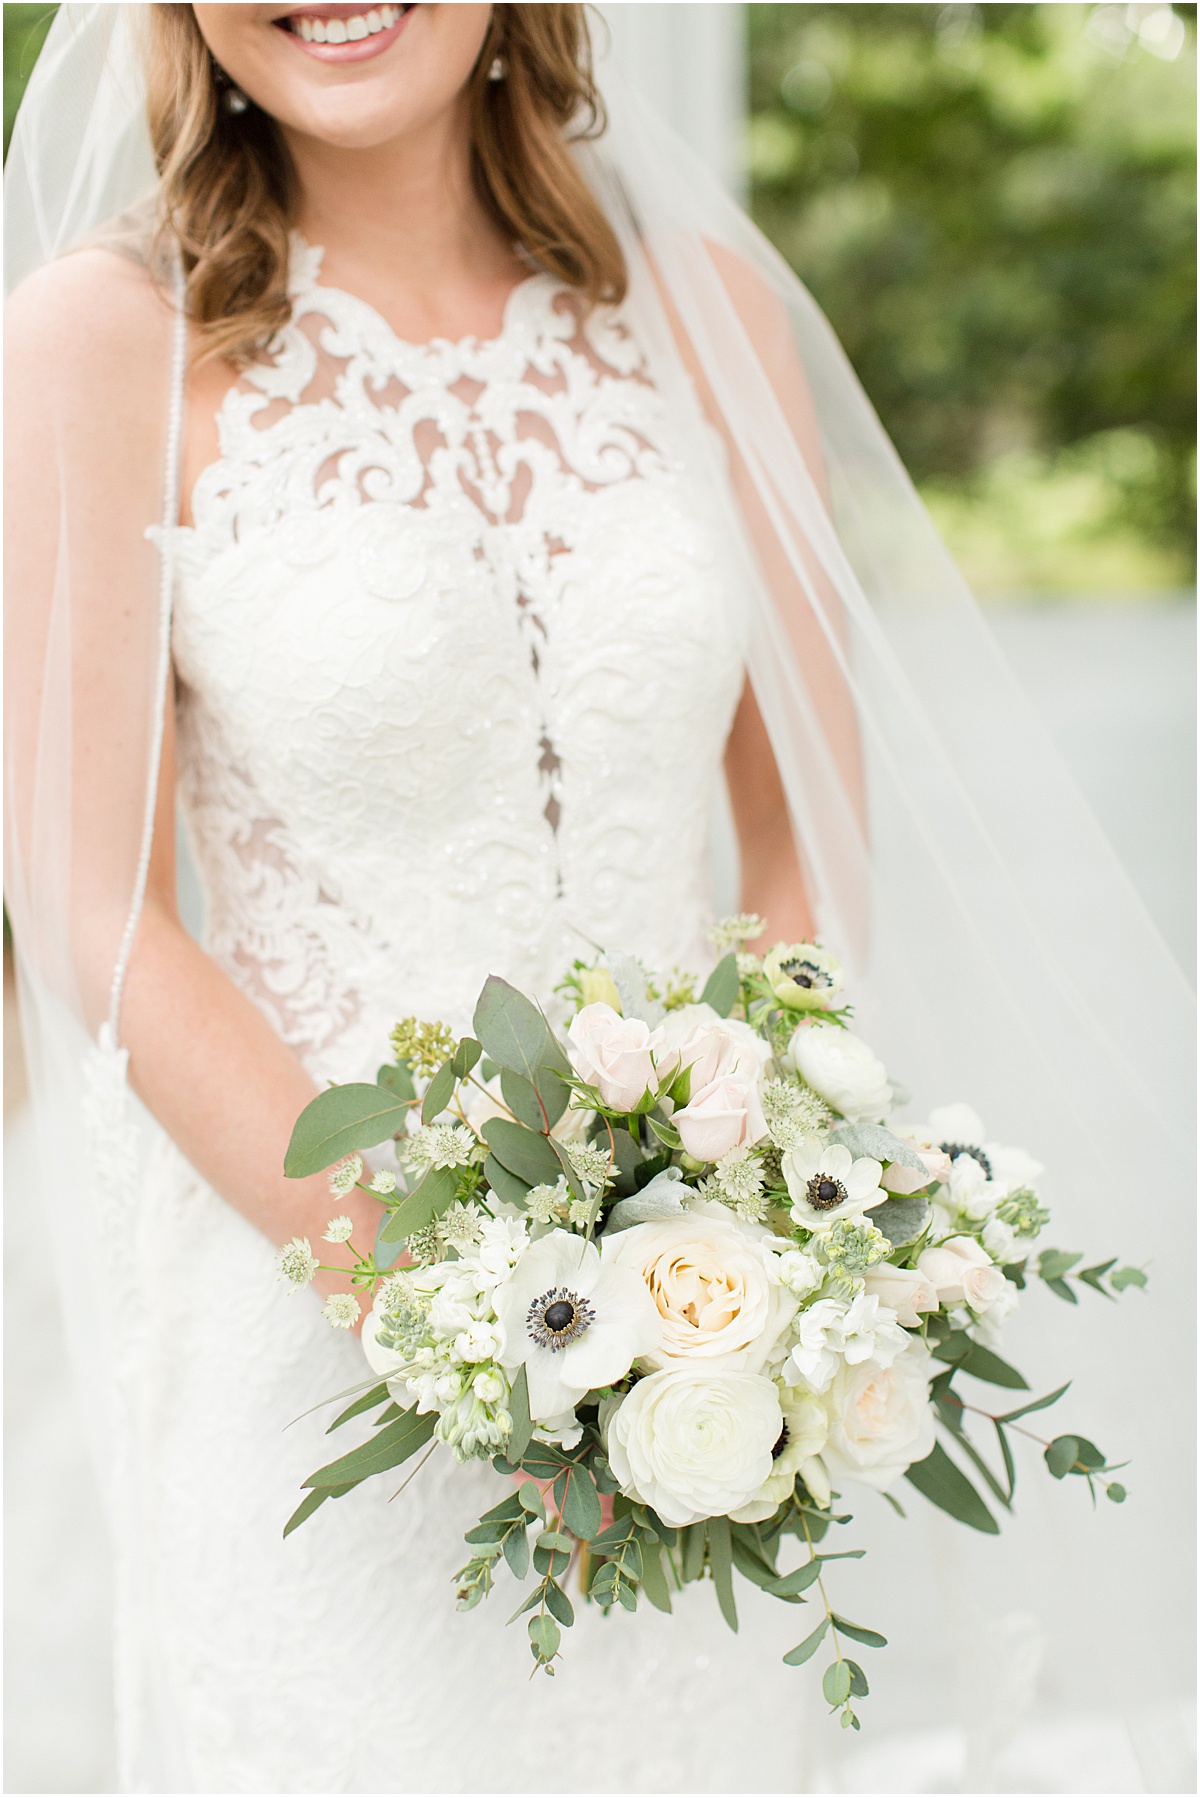 A spring bridal bouquet with creamy pink and peach roses, anemones and greenery.